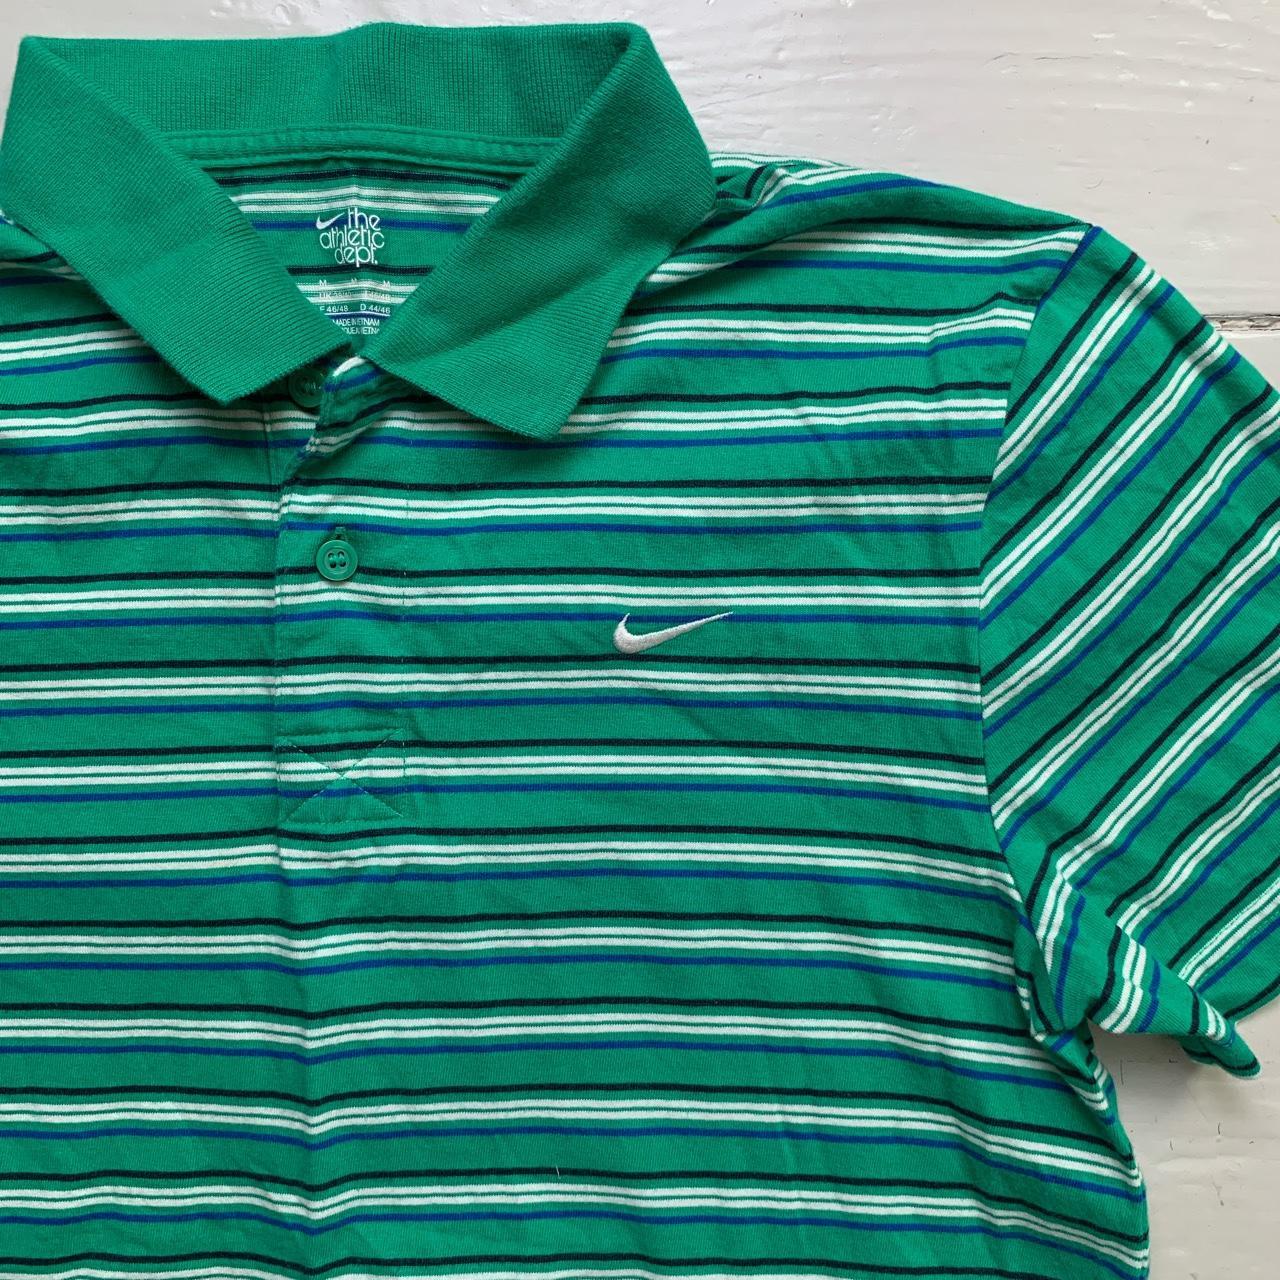 Nike Athletic Department Vintage Swoosh Striped Polo Shirt